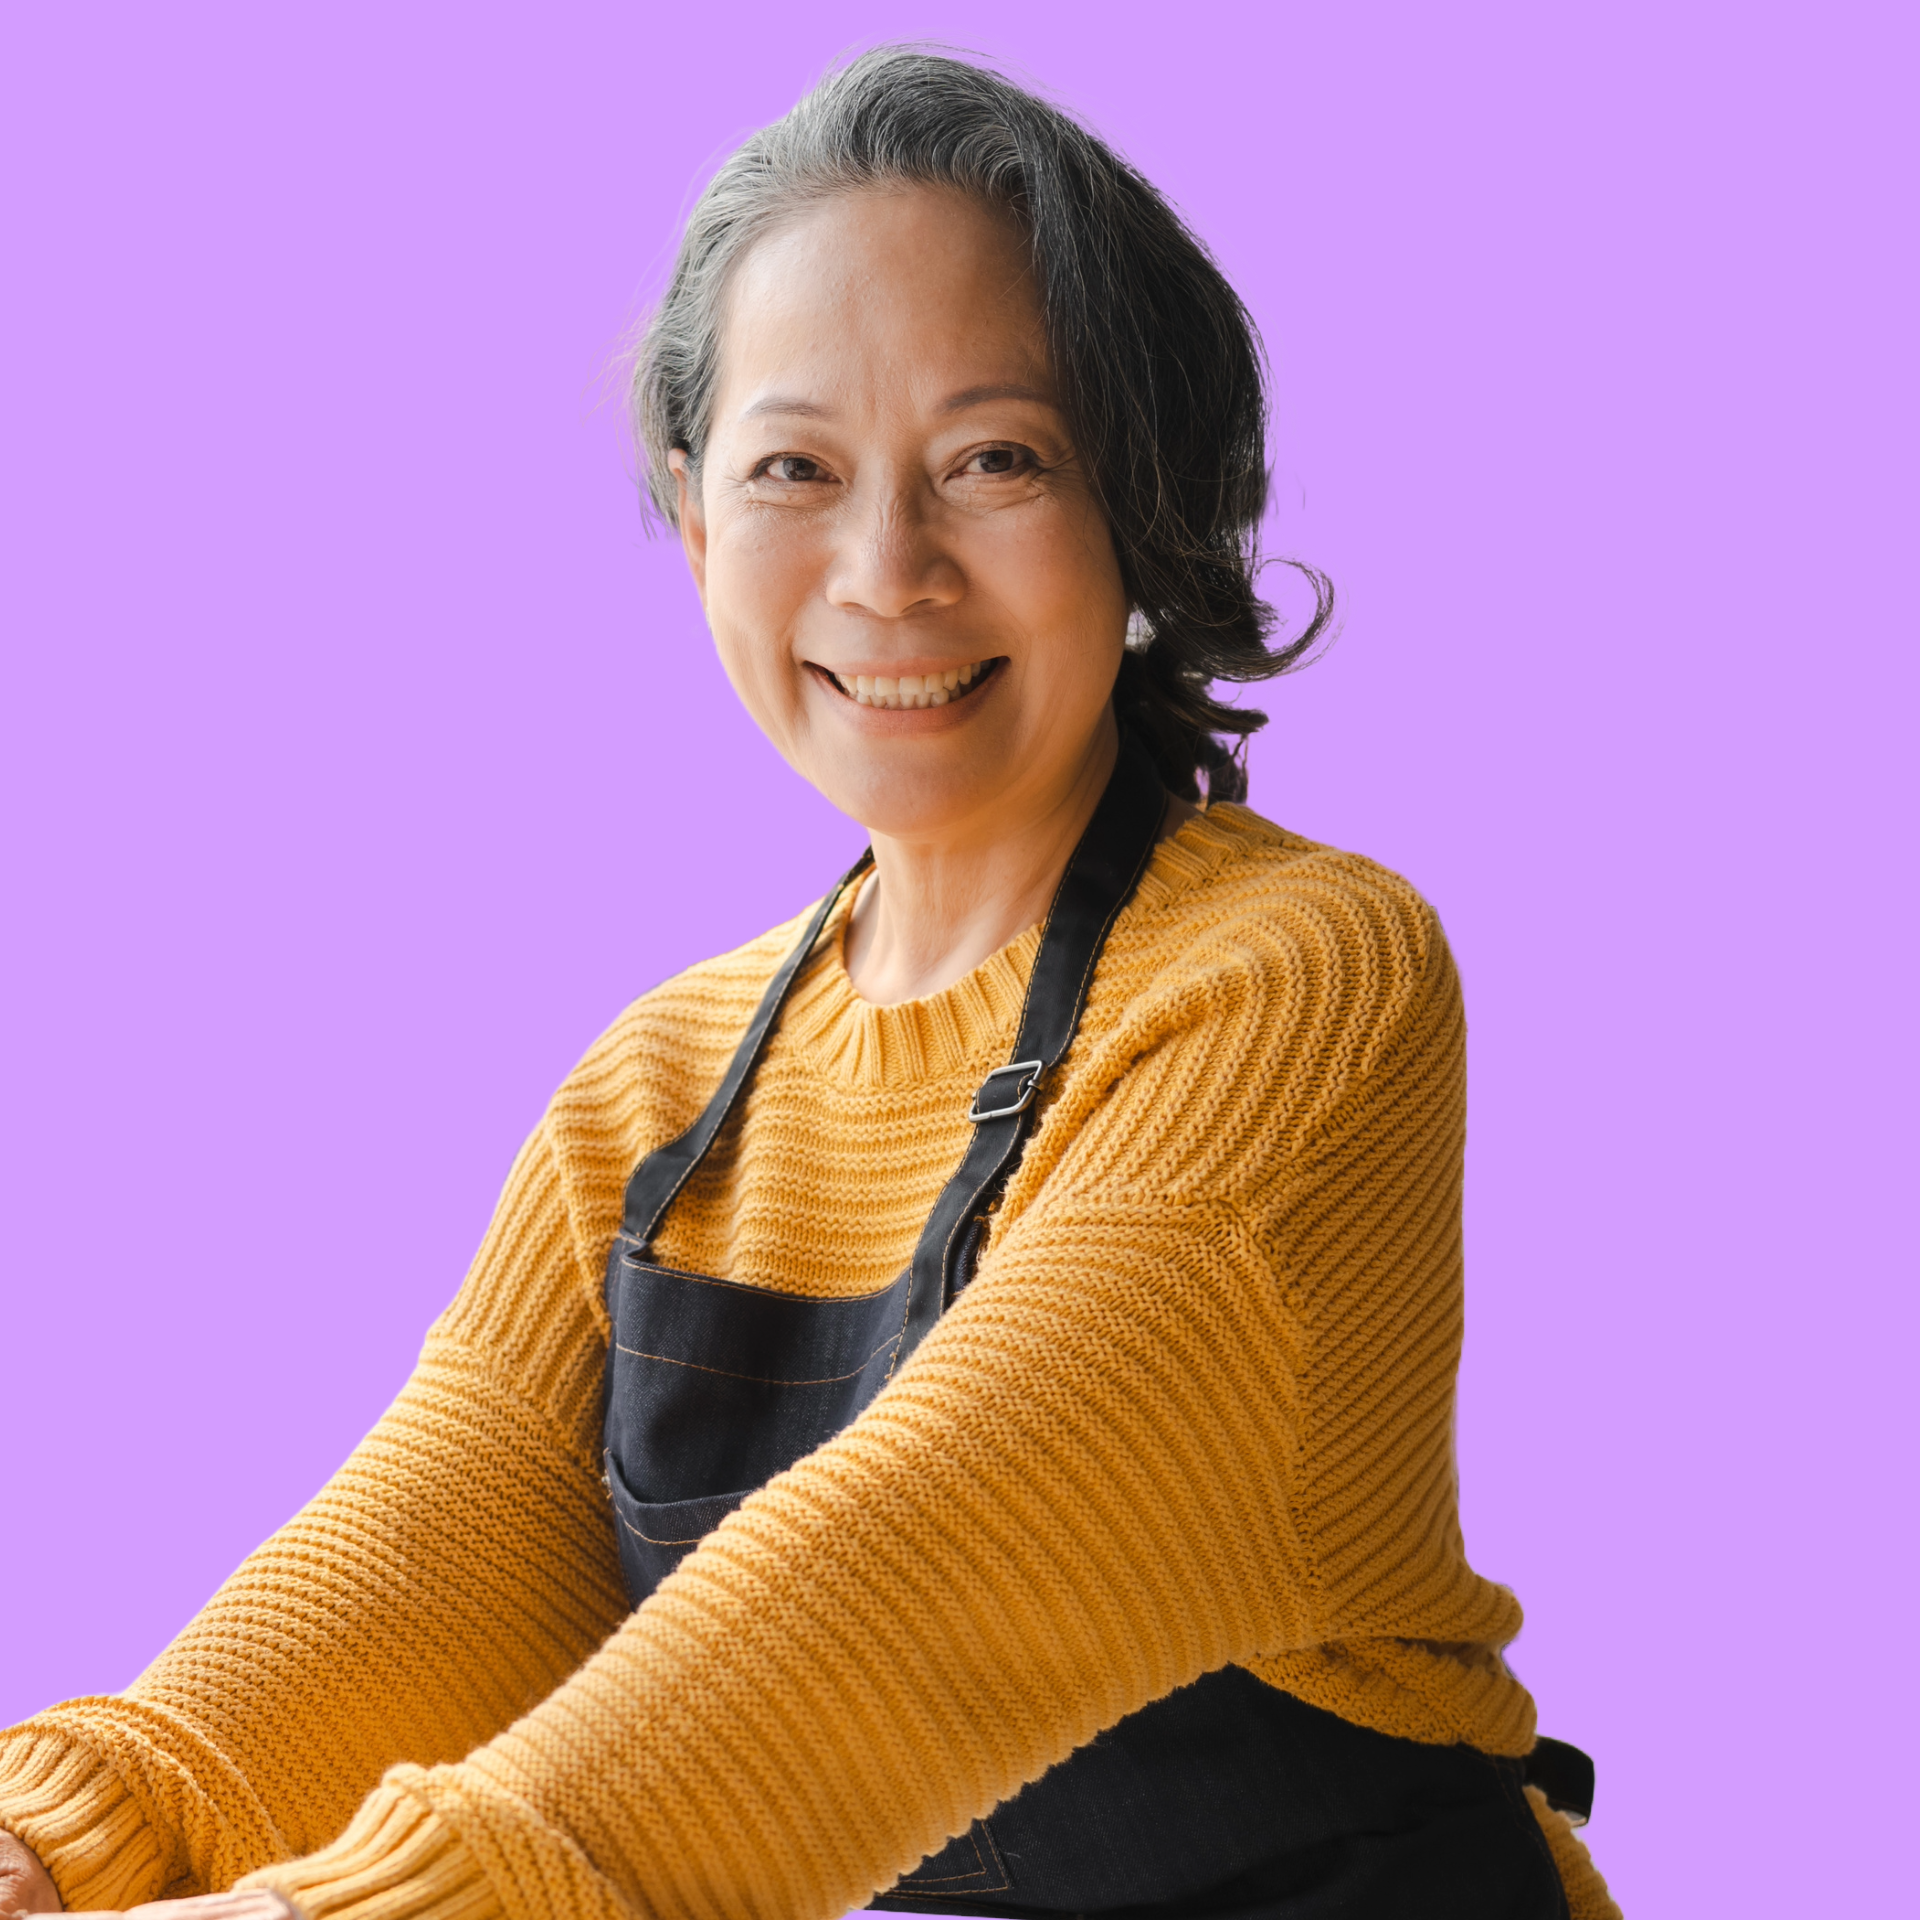 a woman in a yellow sweater and black apron is smiling